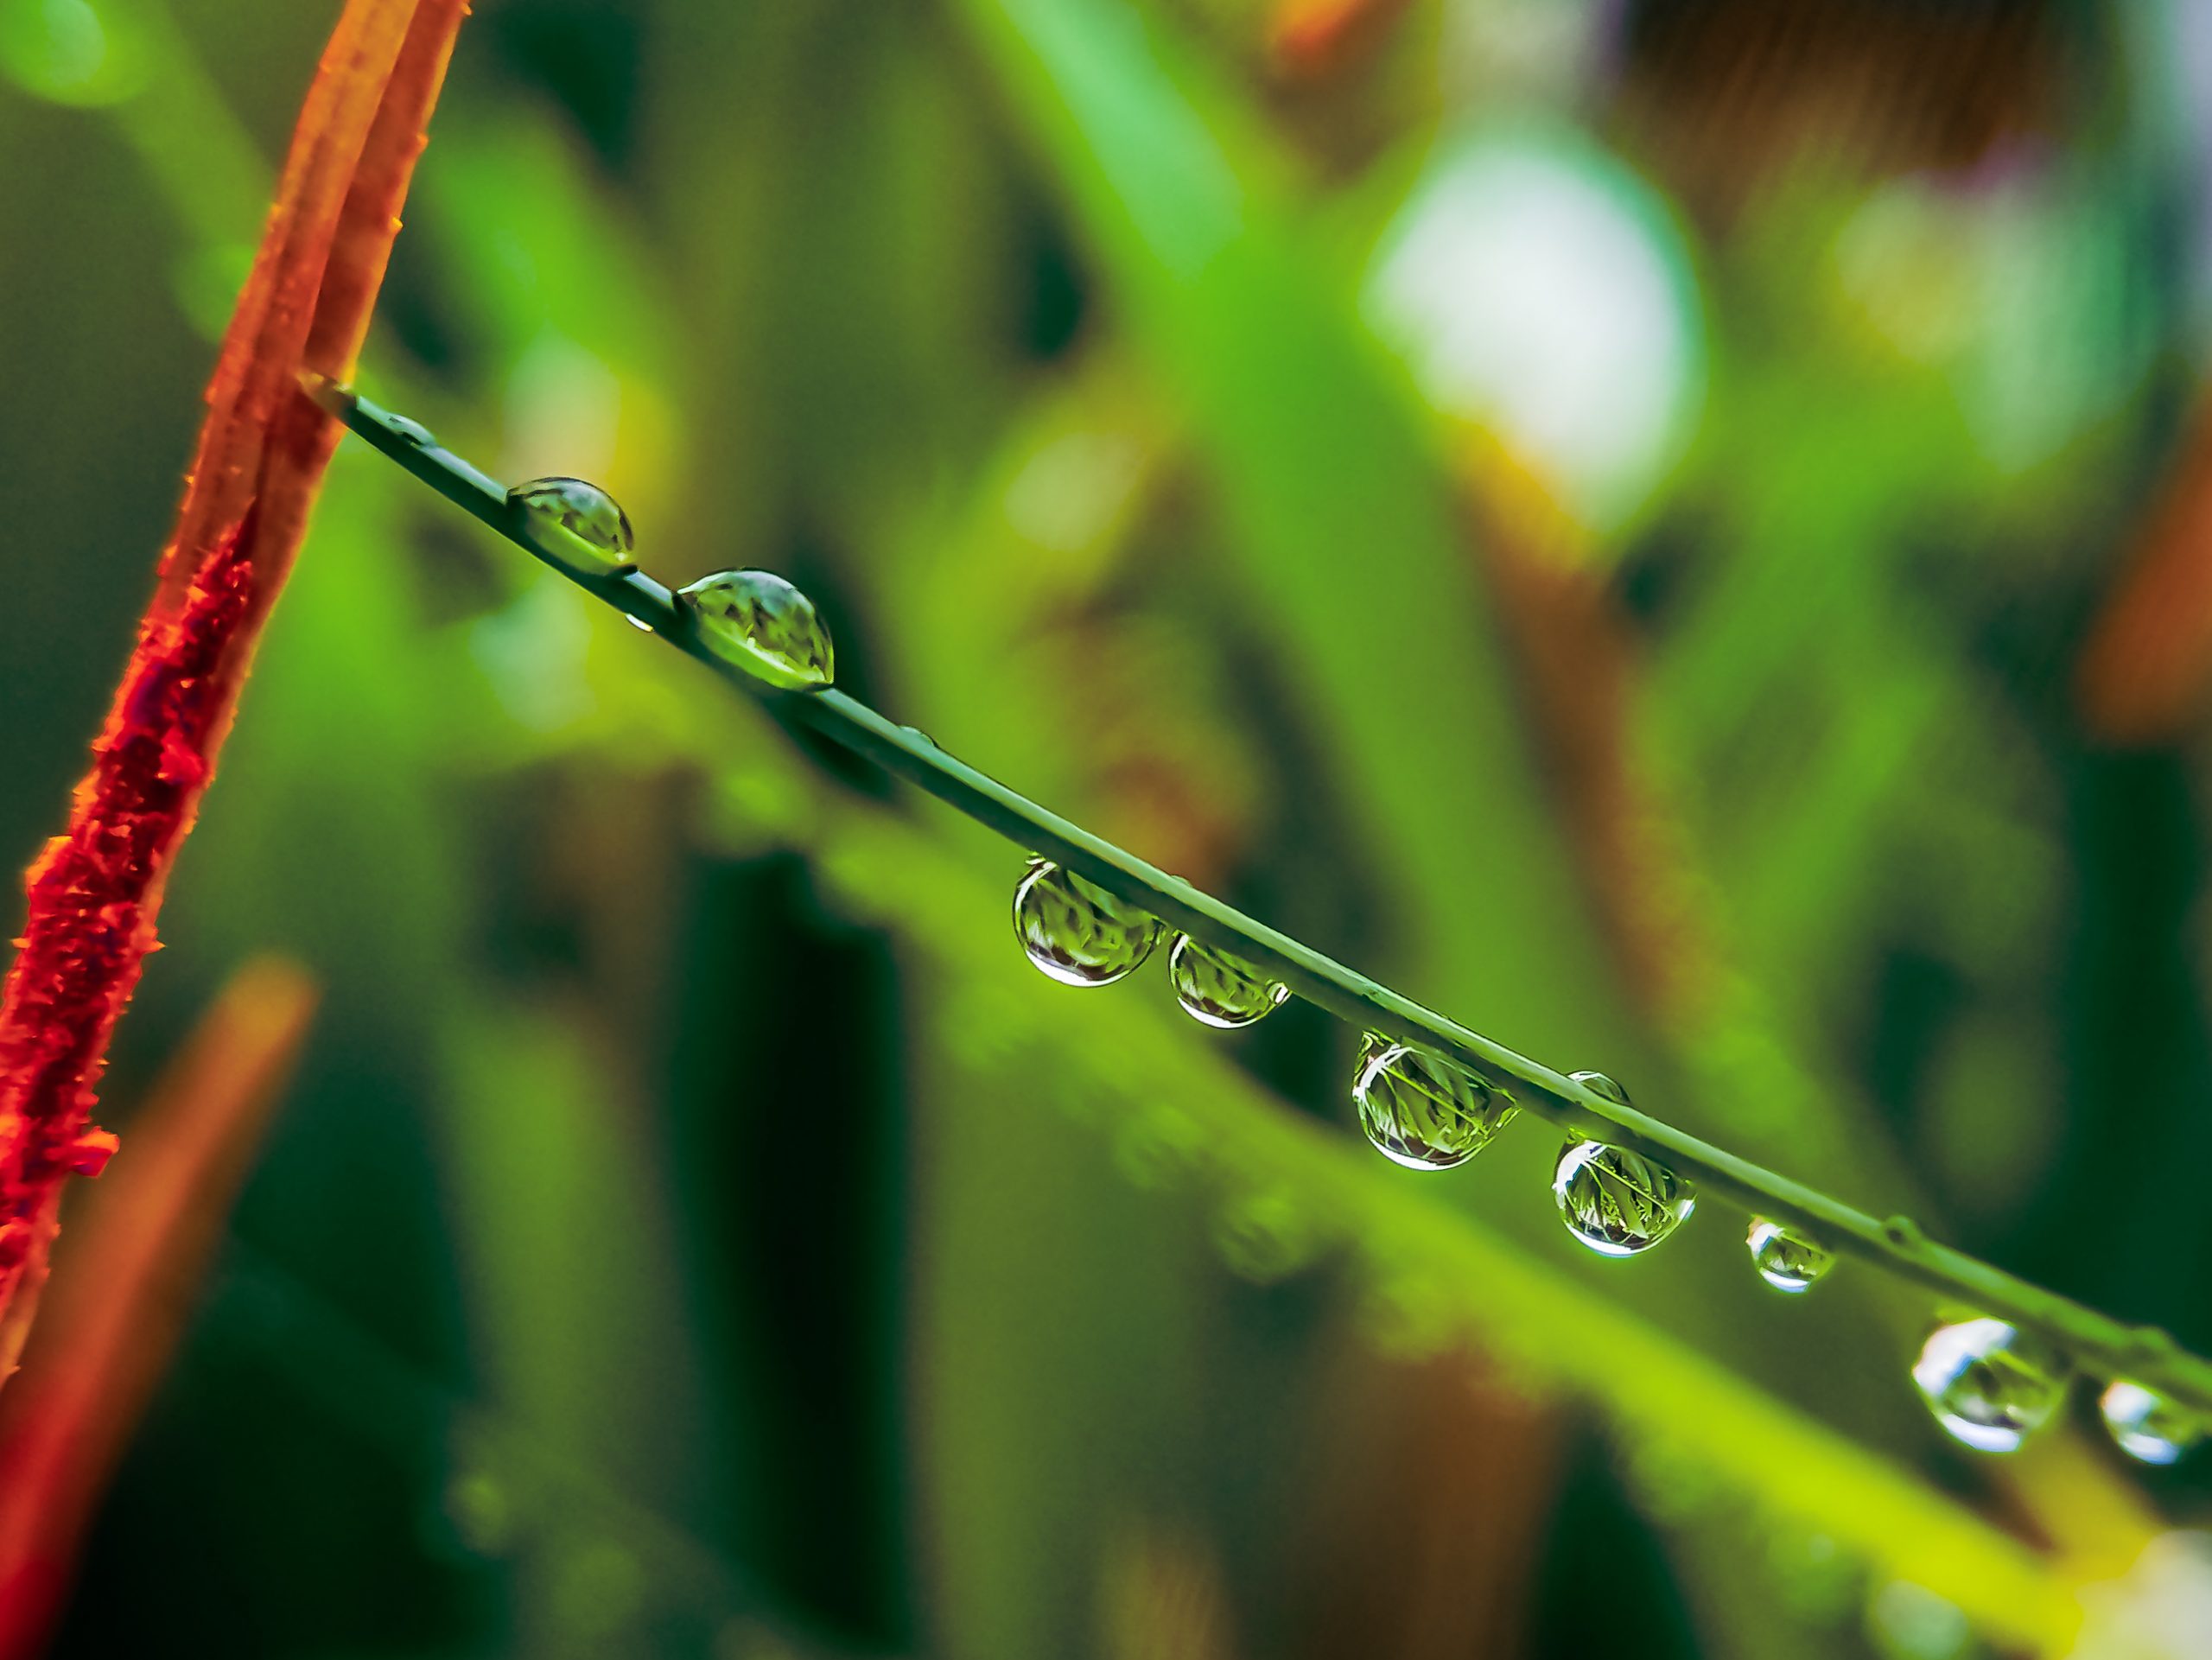 Water droplets on a stem